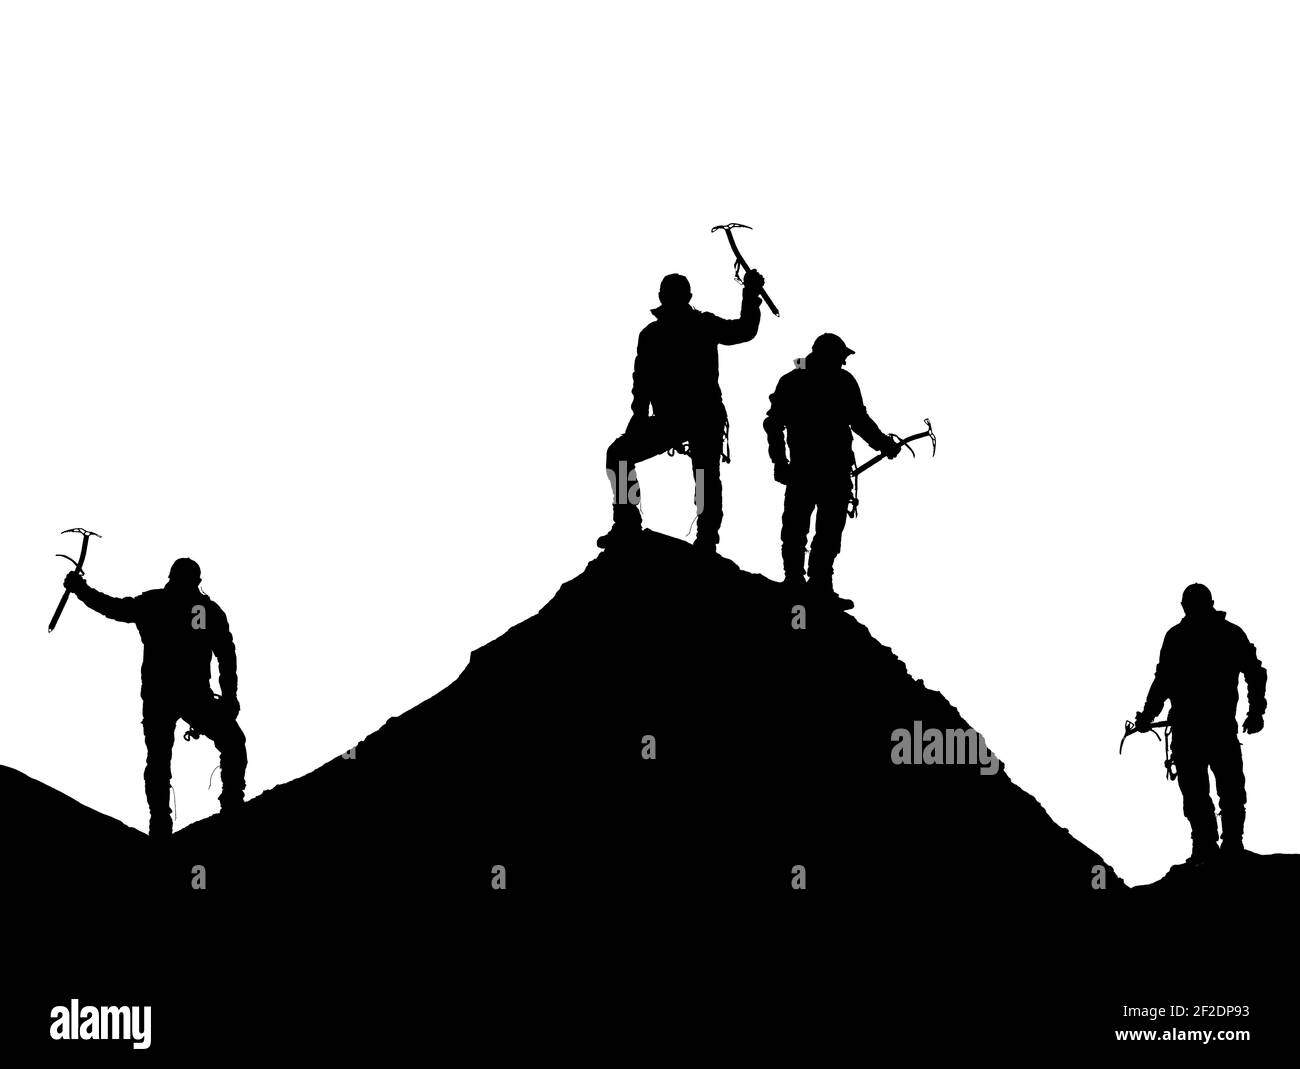 silhouette of four climbers with ice axe in hand on top of Mount Everest silhouette, black and white mountain vector illustration logo Stock Photo